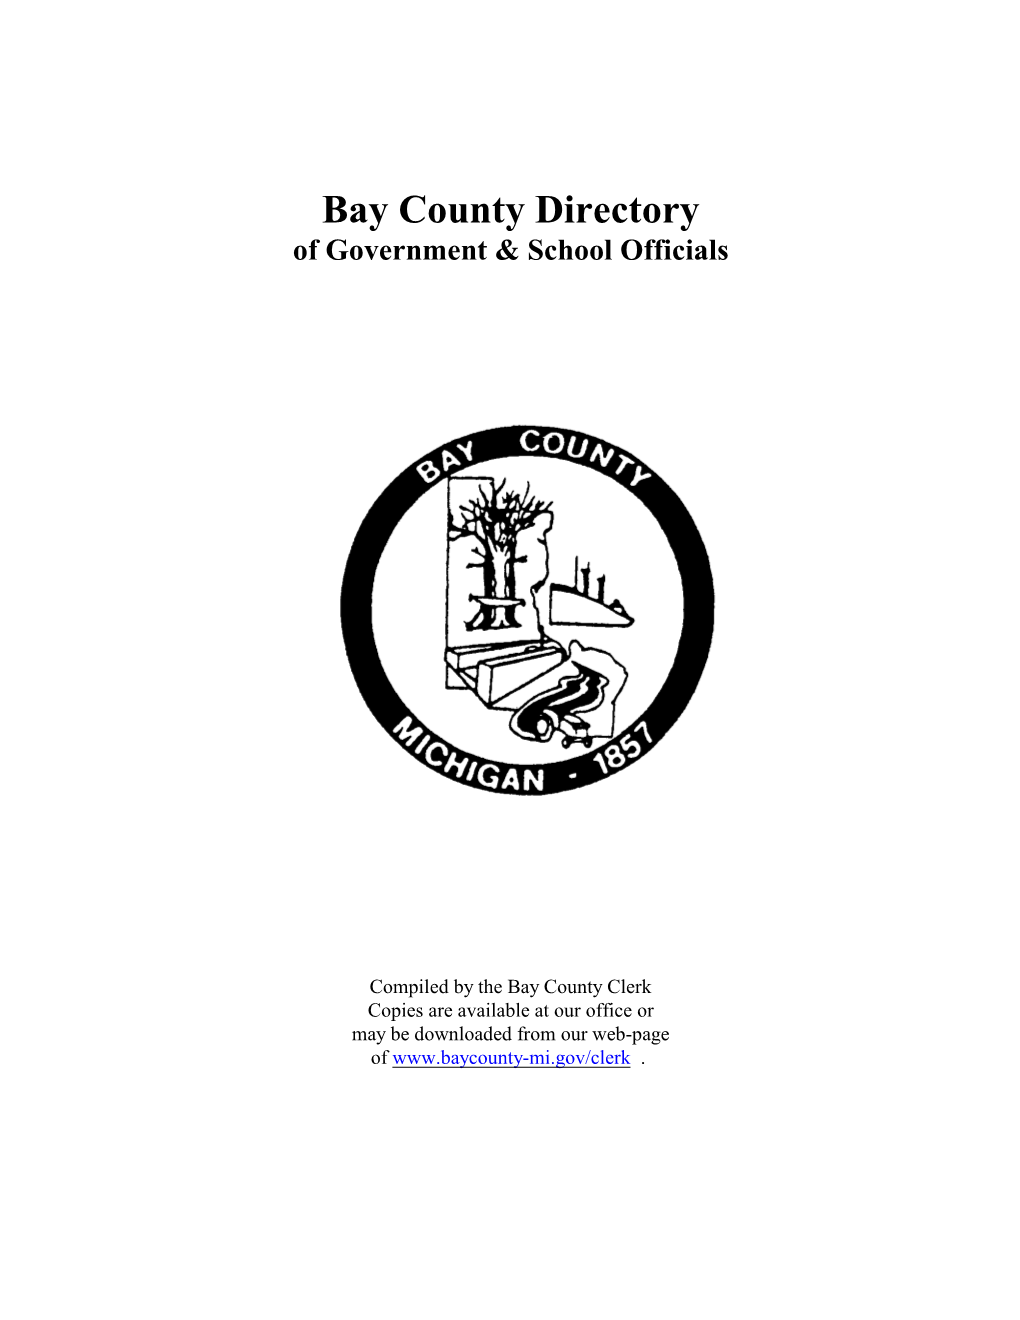 Bay County Directory of Government & School Officials